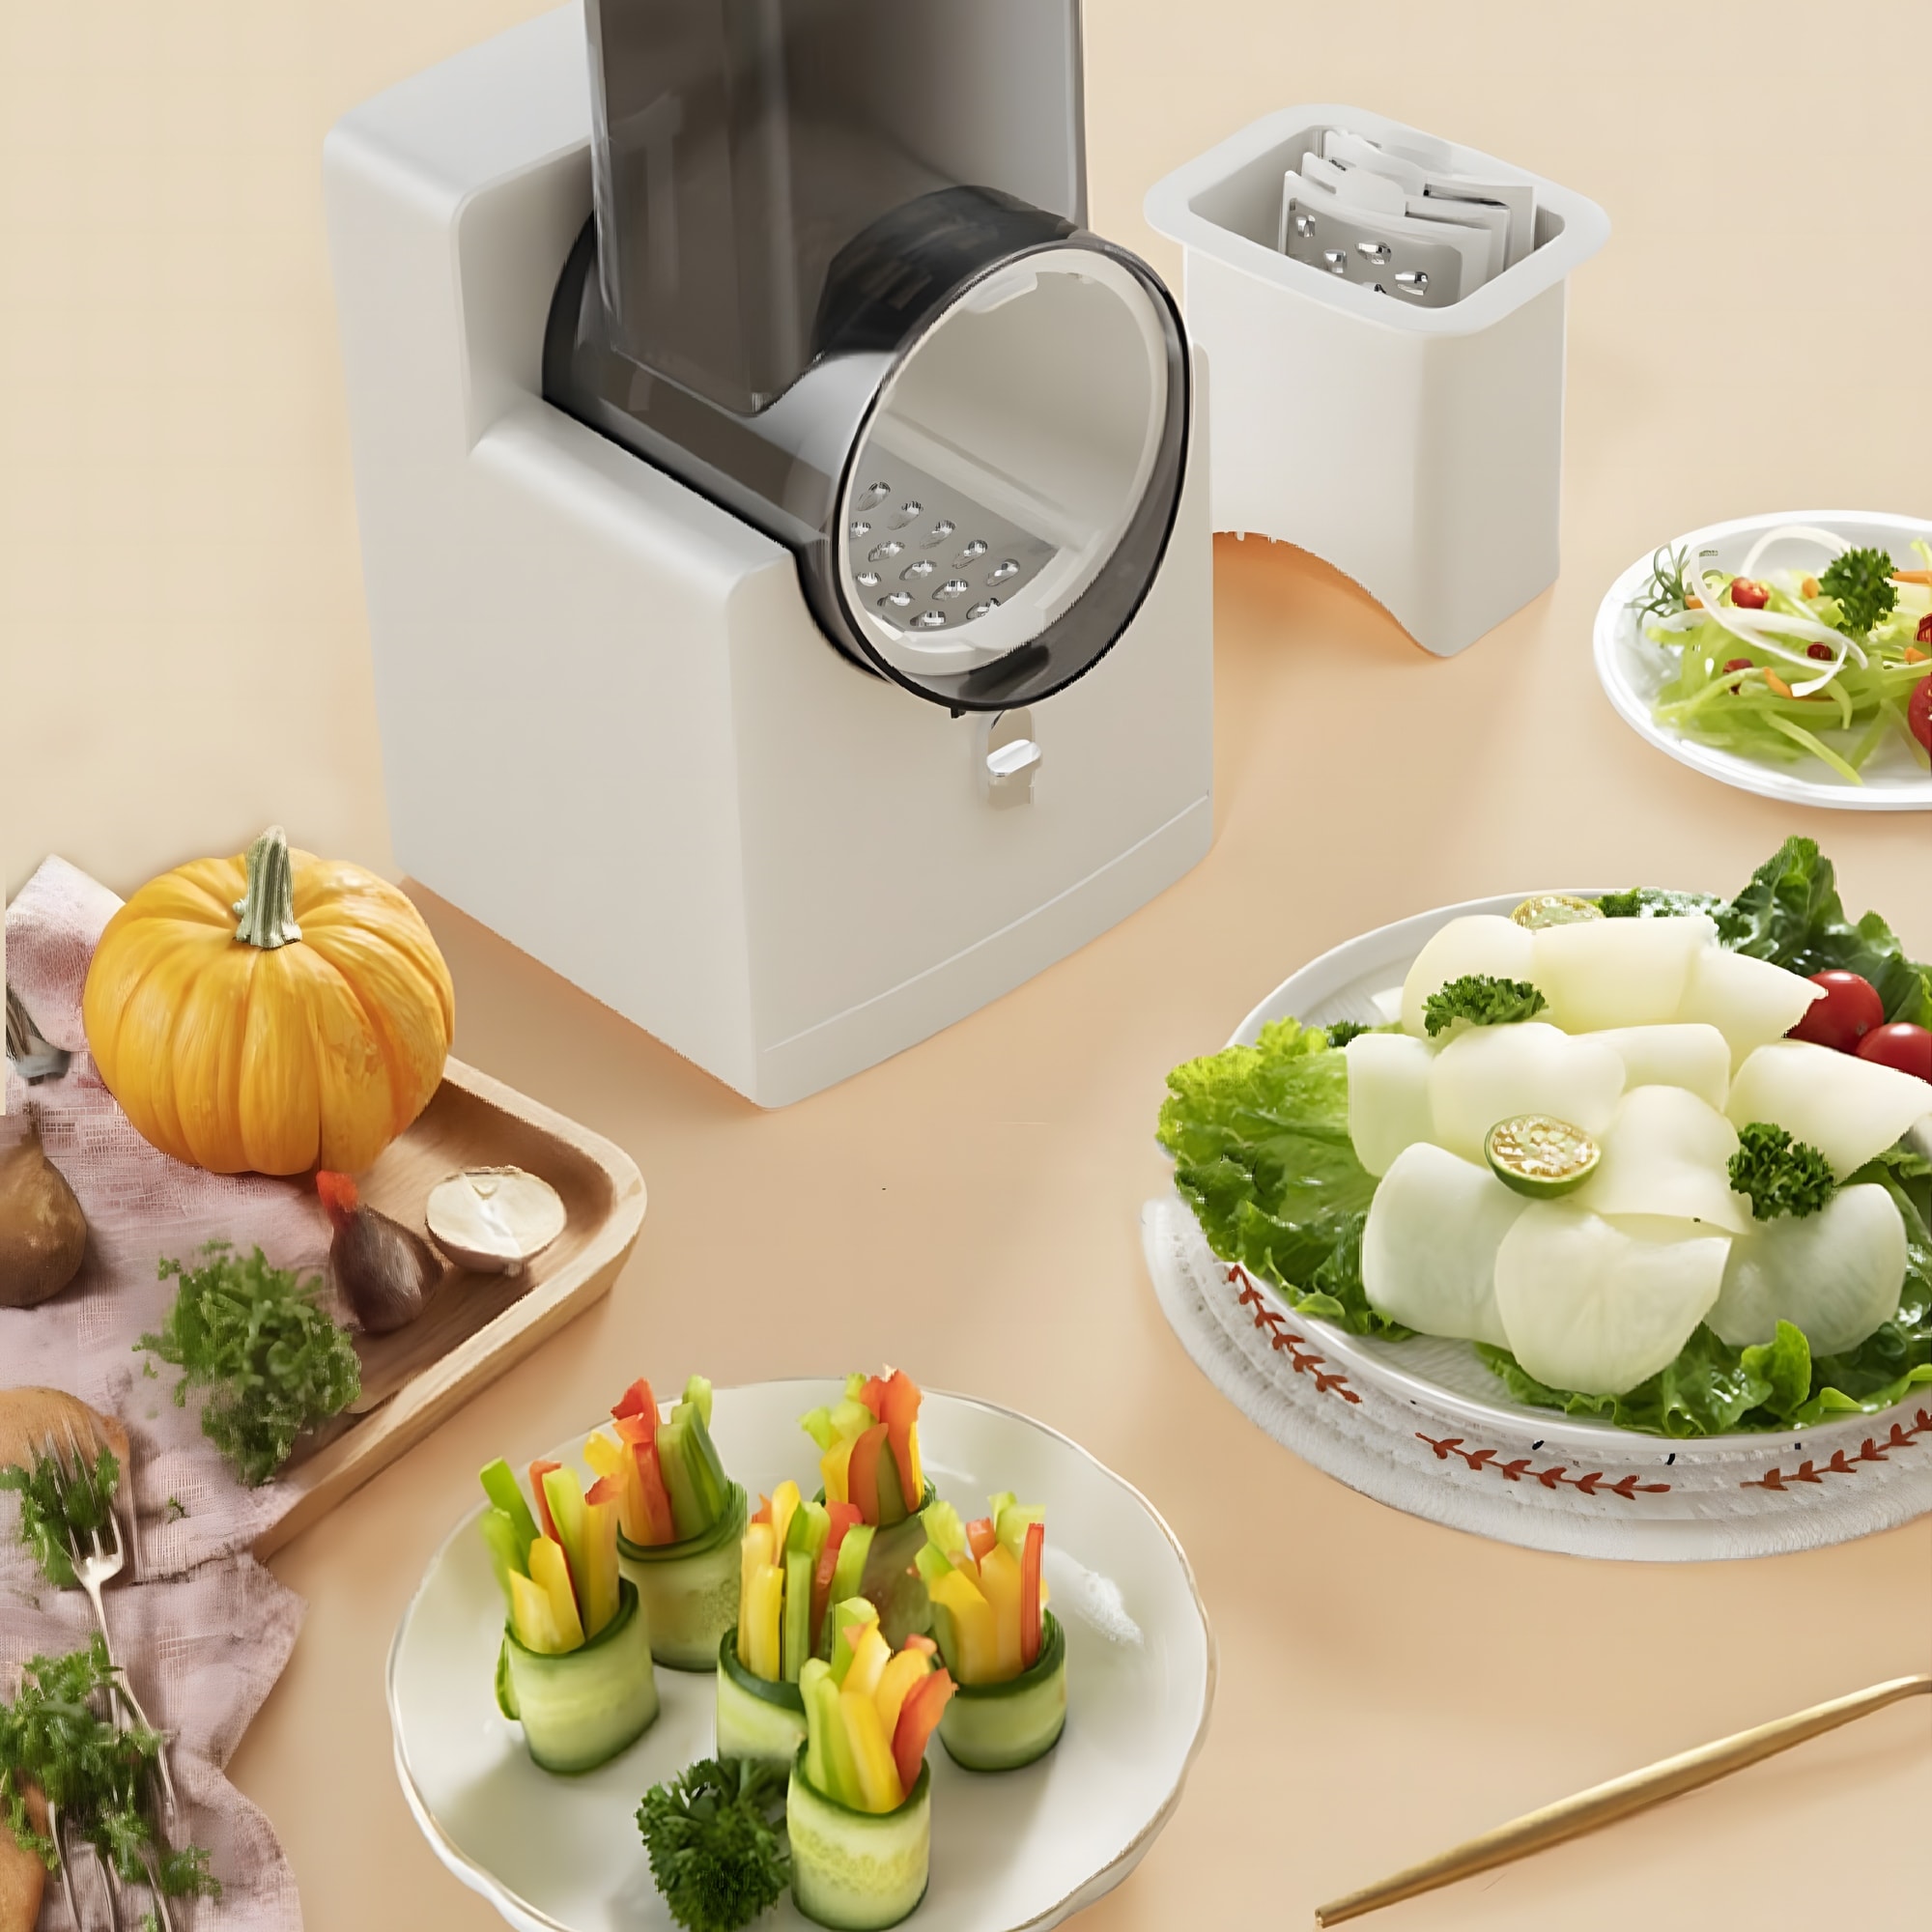 https://ak1.ostkcdn.com/images/products/is/images/direct/db5fed3ea40df70318d5fd5d4867f8ac47ce89f4/Multi-Functional-Electric-Vegetable-Slicer-Dicer-Chopper.jpg